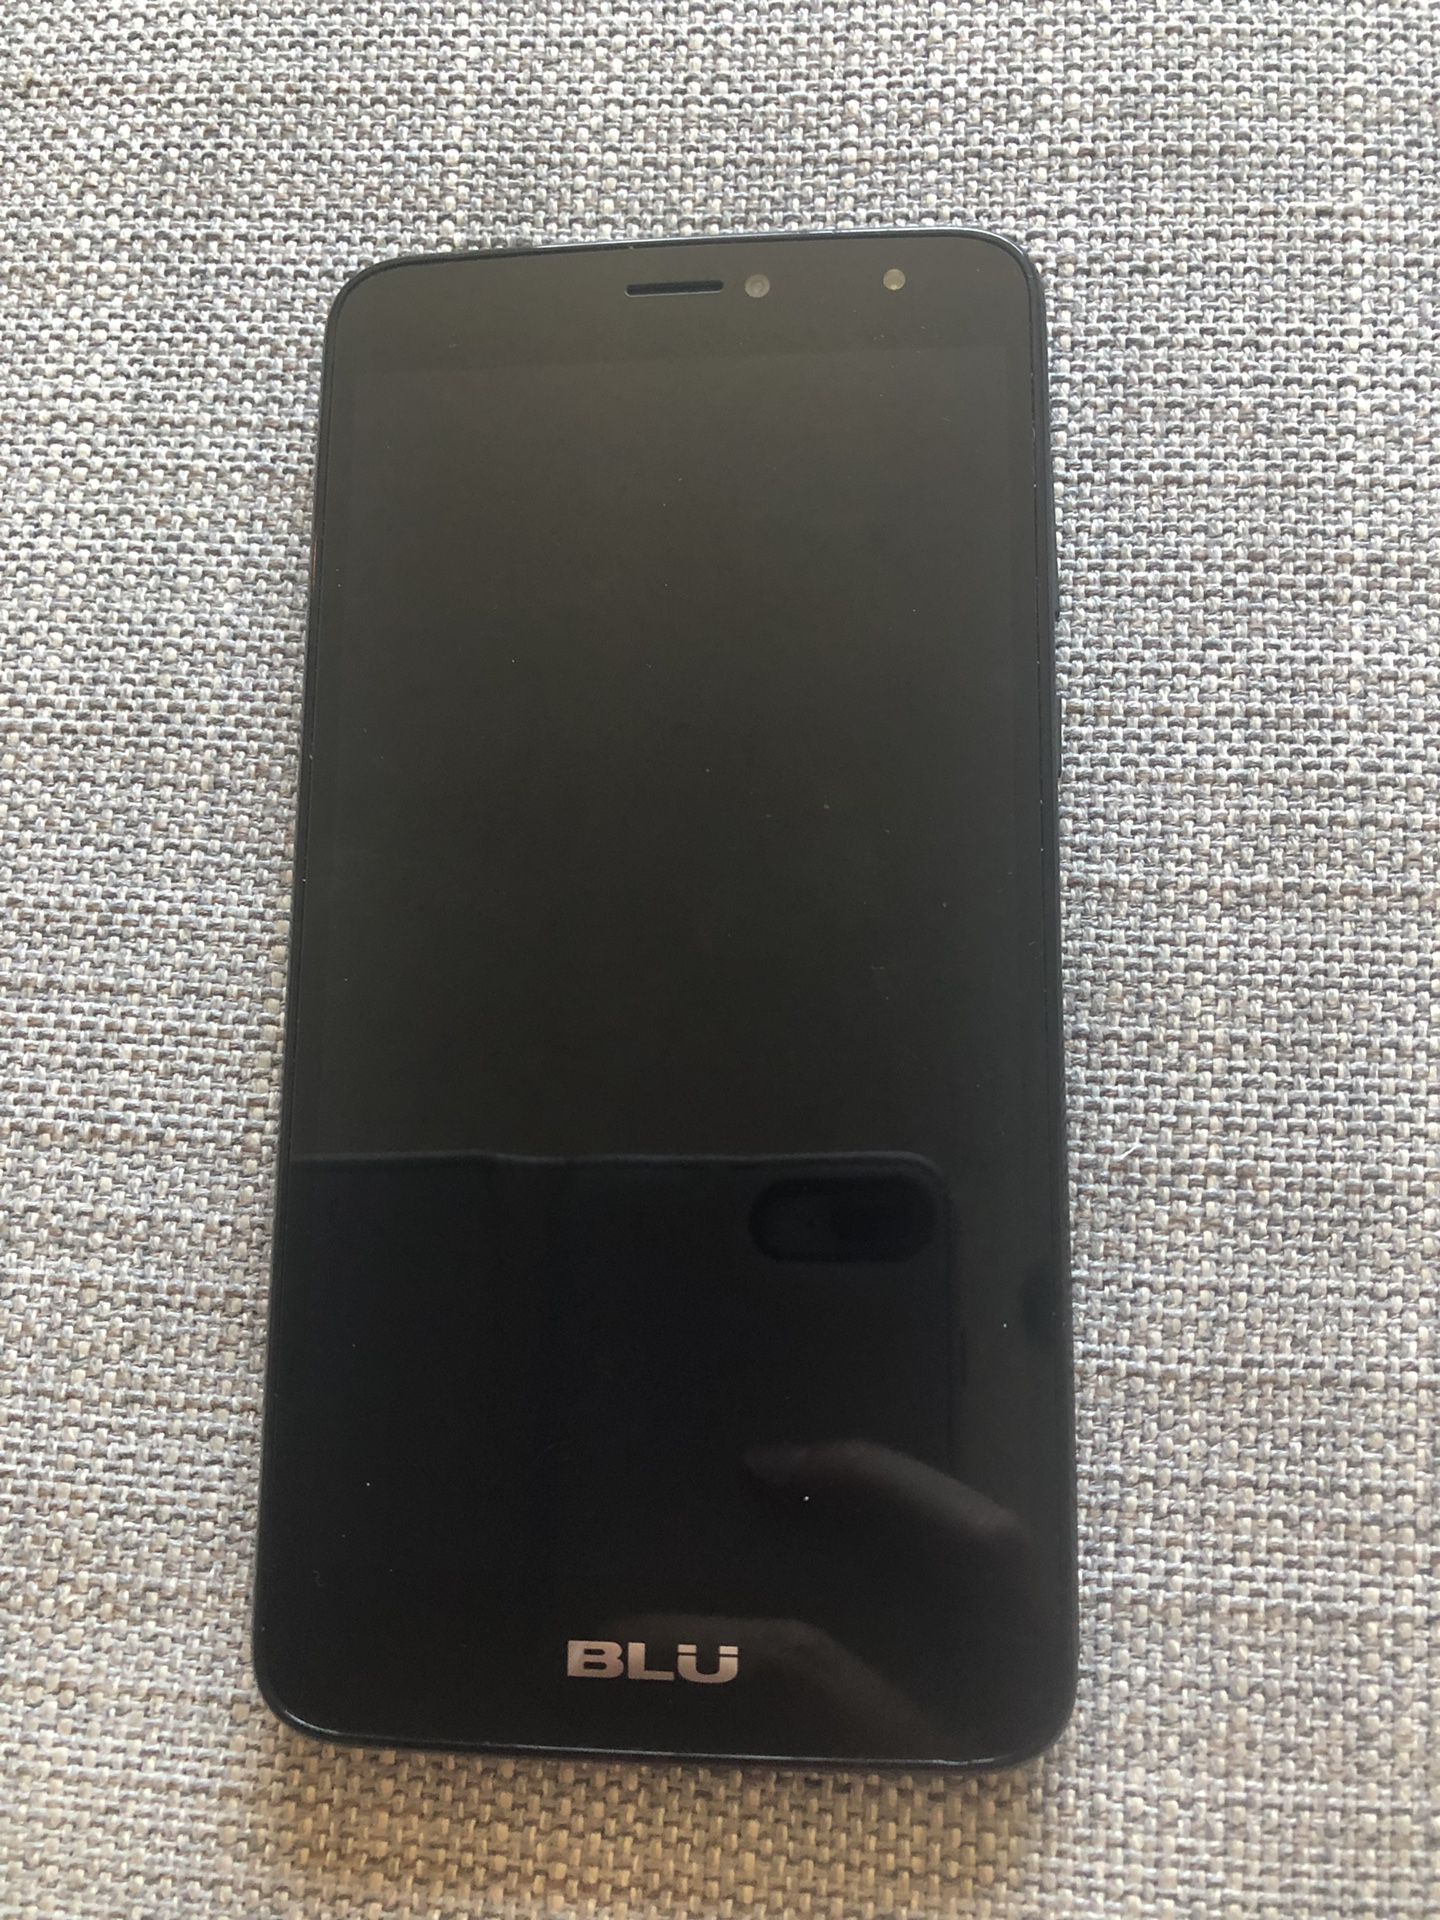 Android BLU great condition